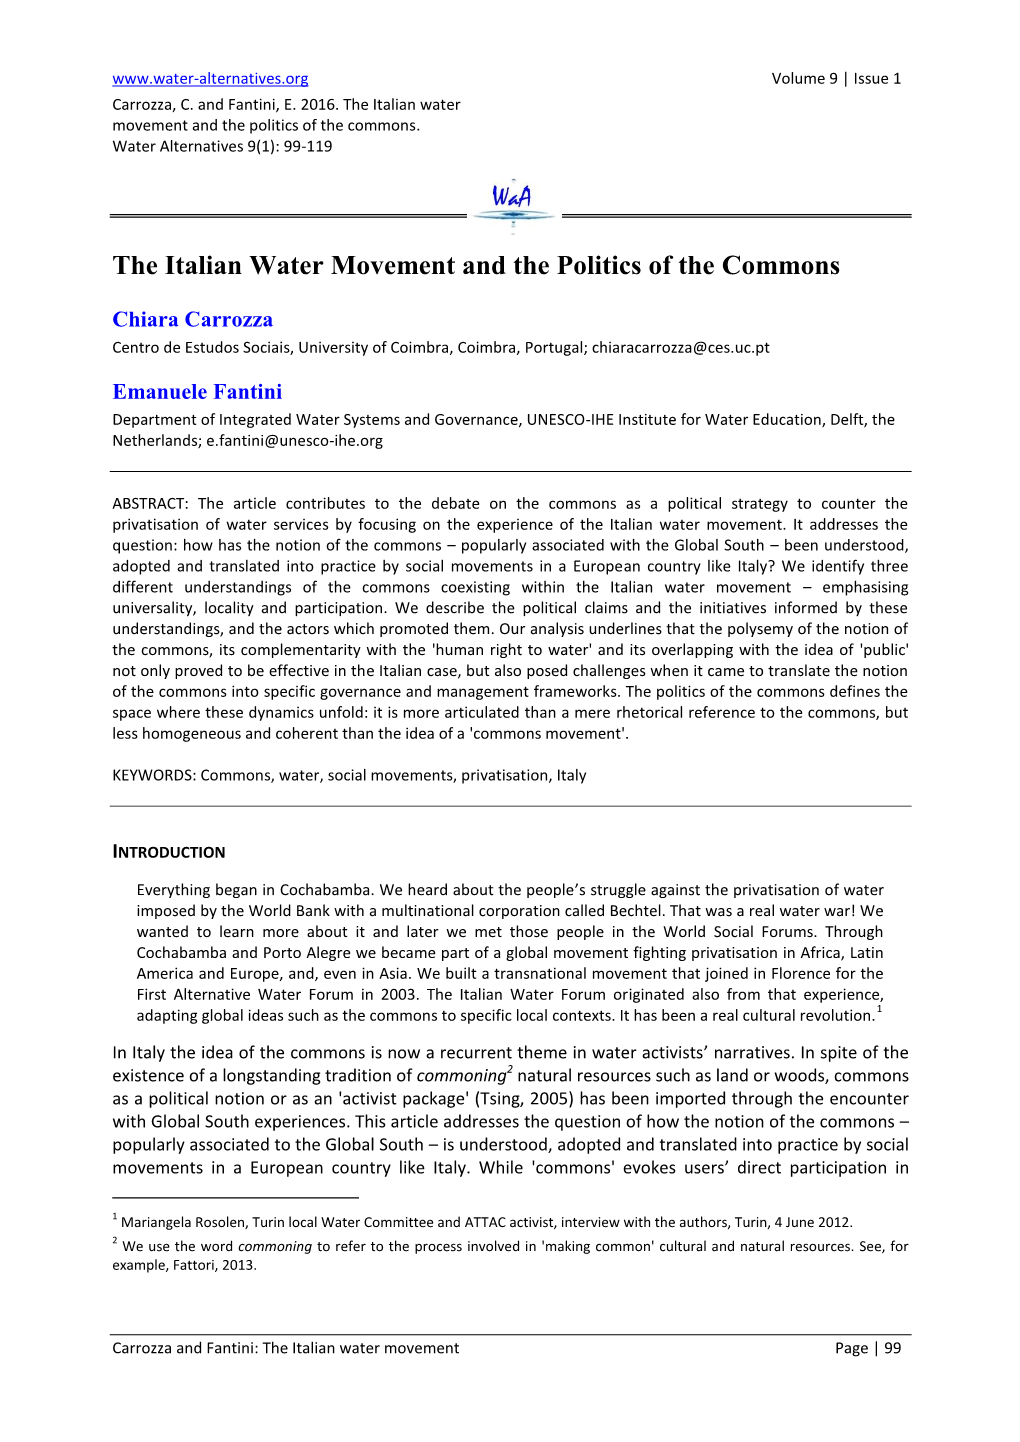 The Italian Water Movement and the Politics of the Commons